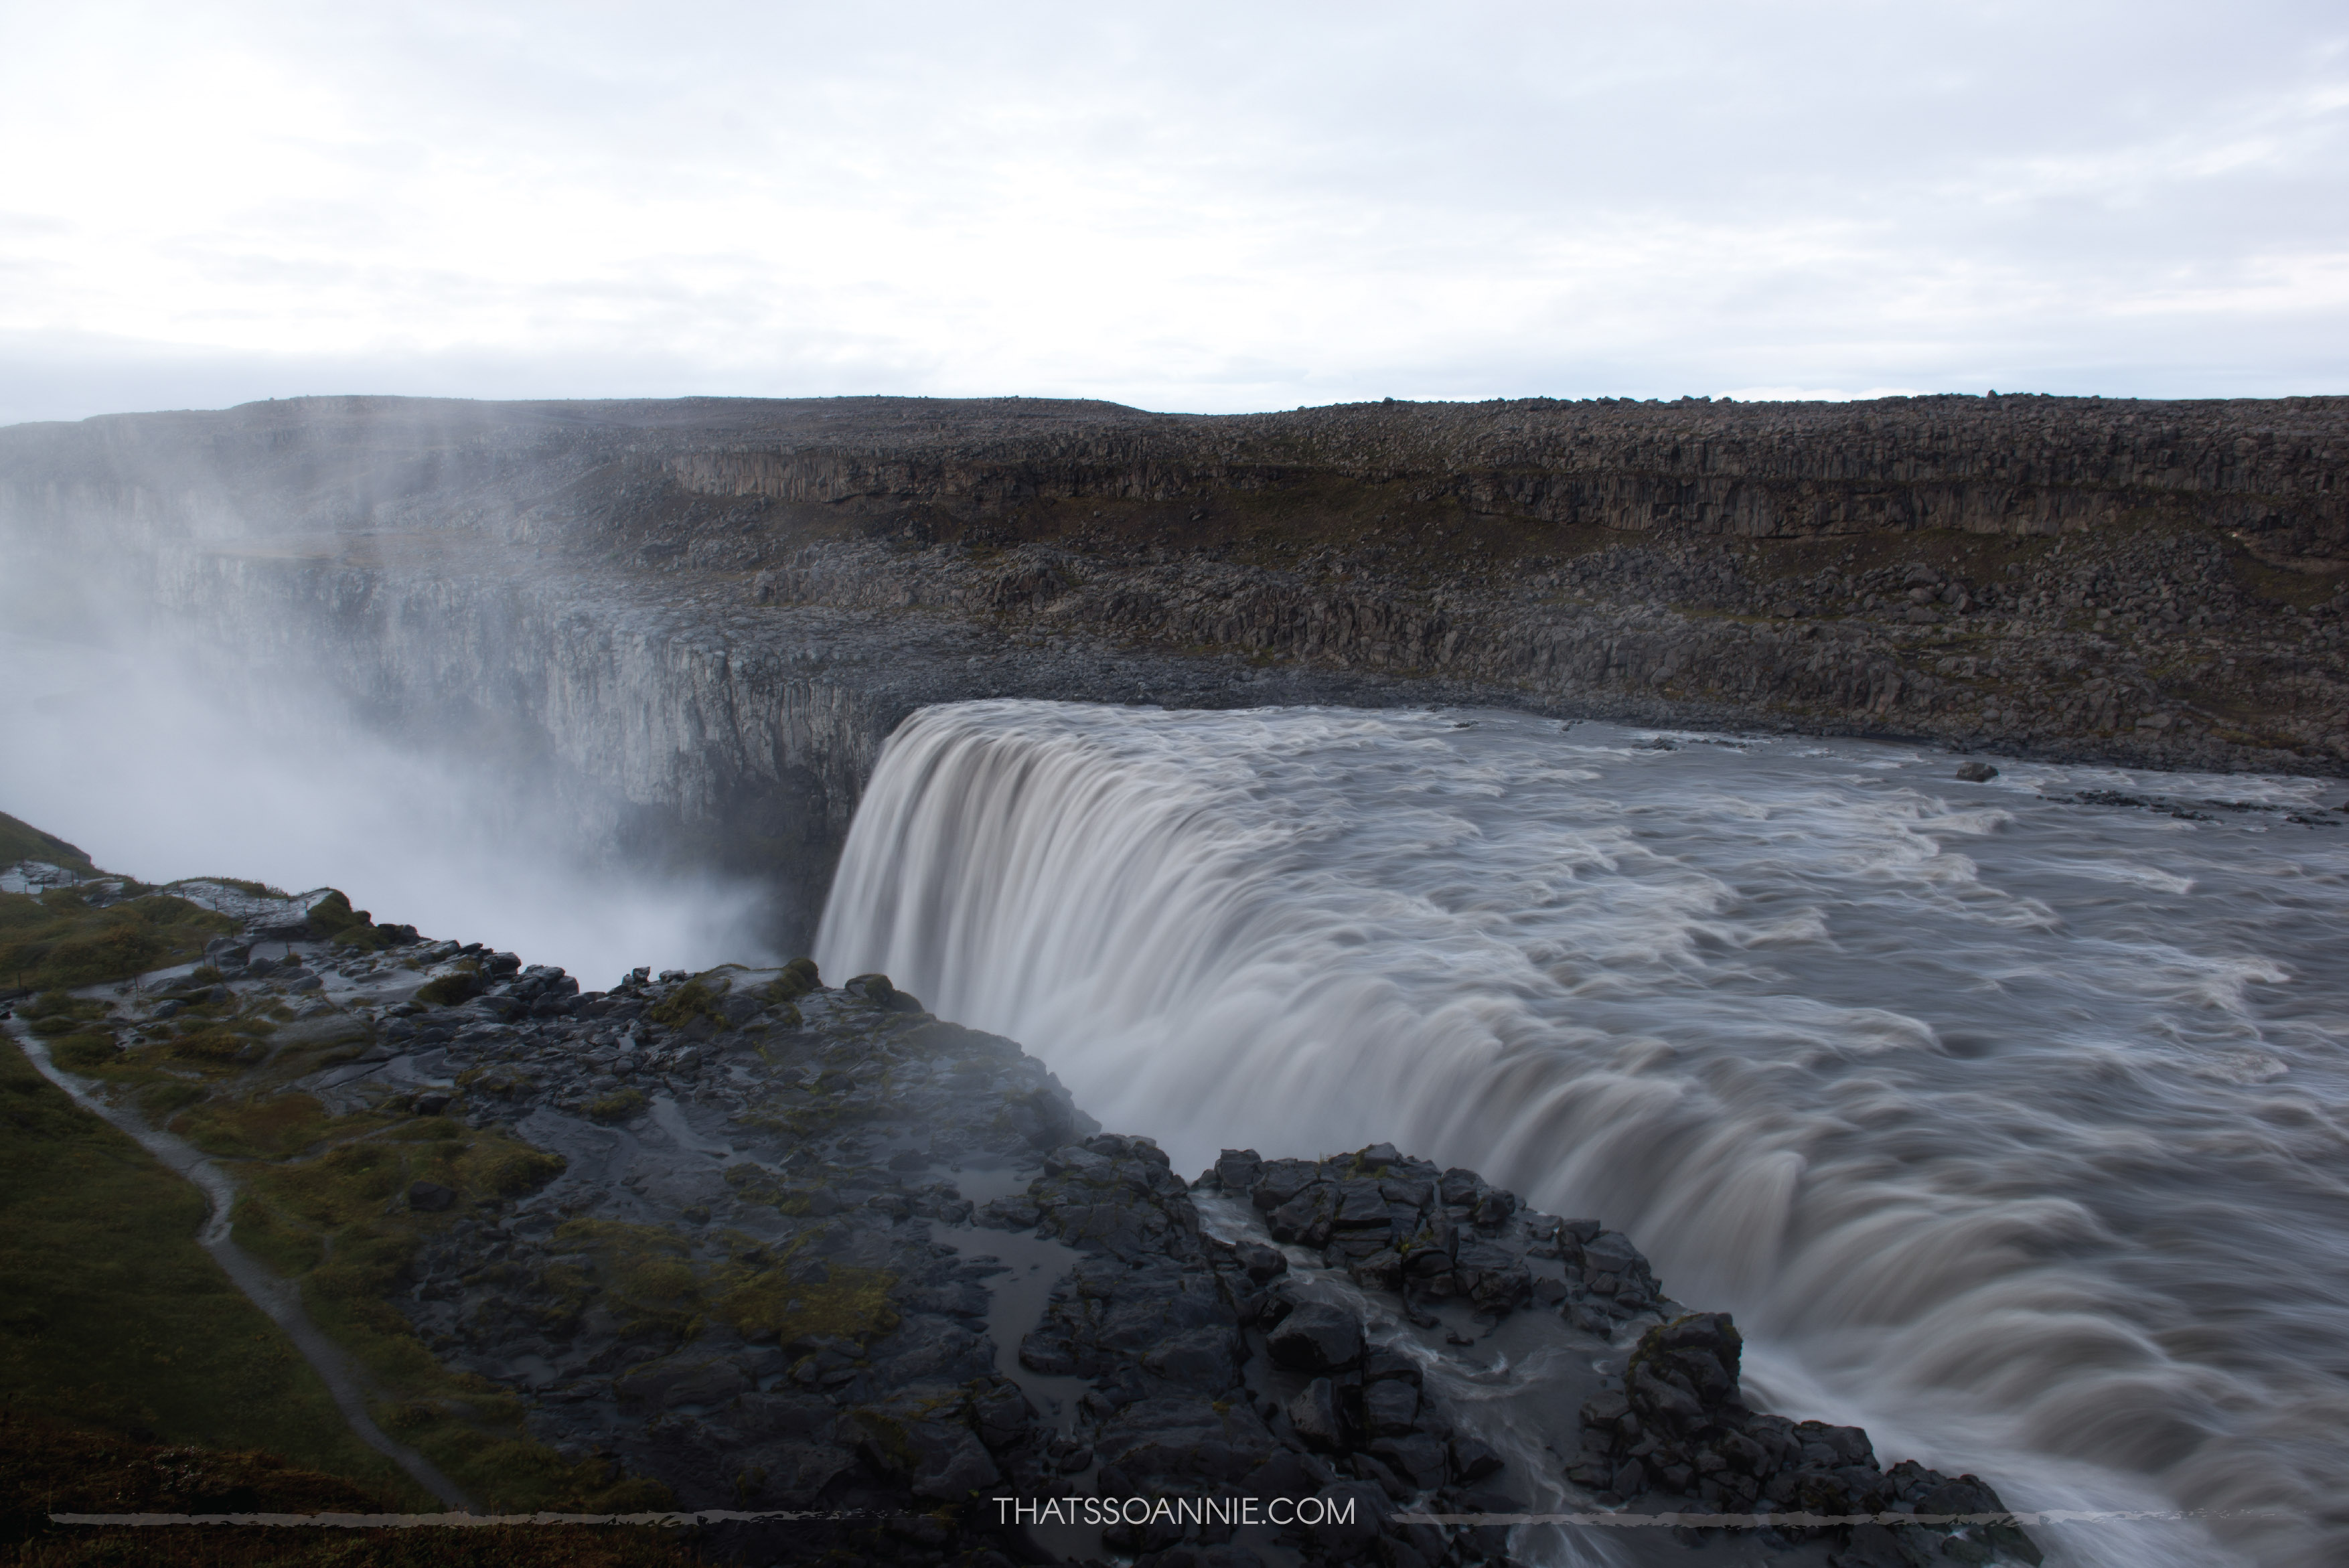 Dettifoss, Europe's most powerful waterfall